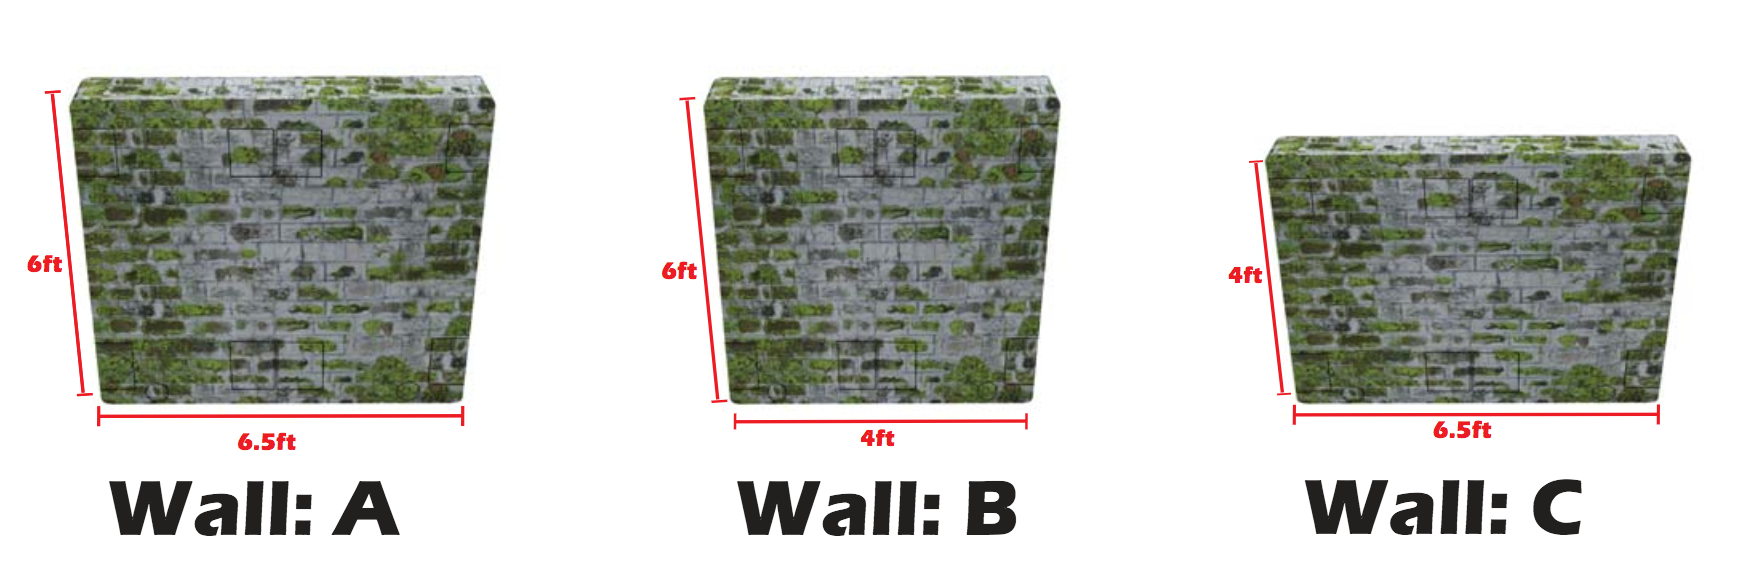 Tactical Bunkers for Paintball WALLS ABC Scenario